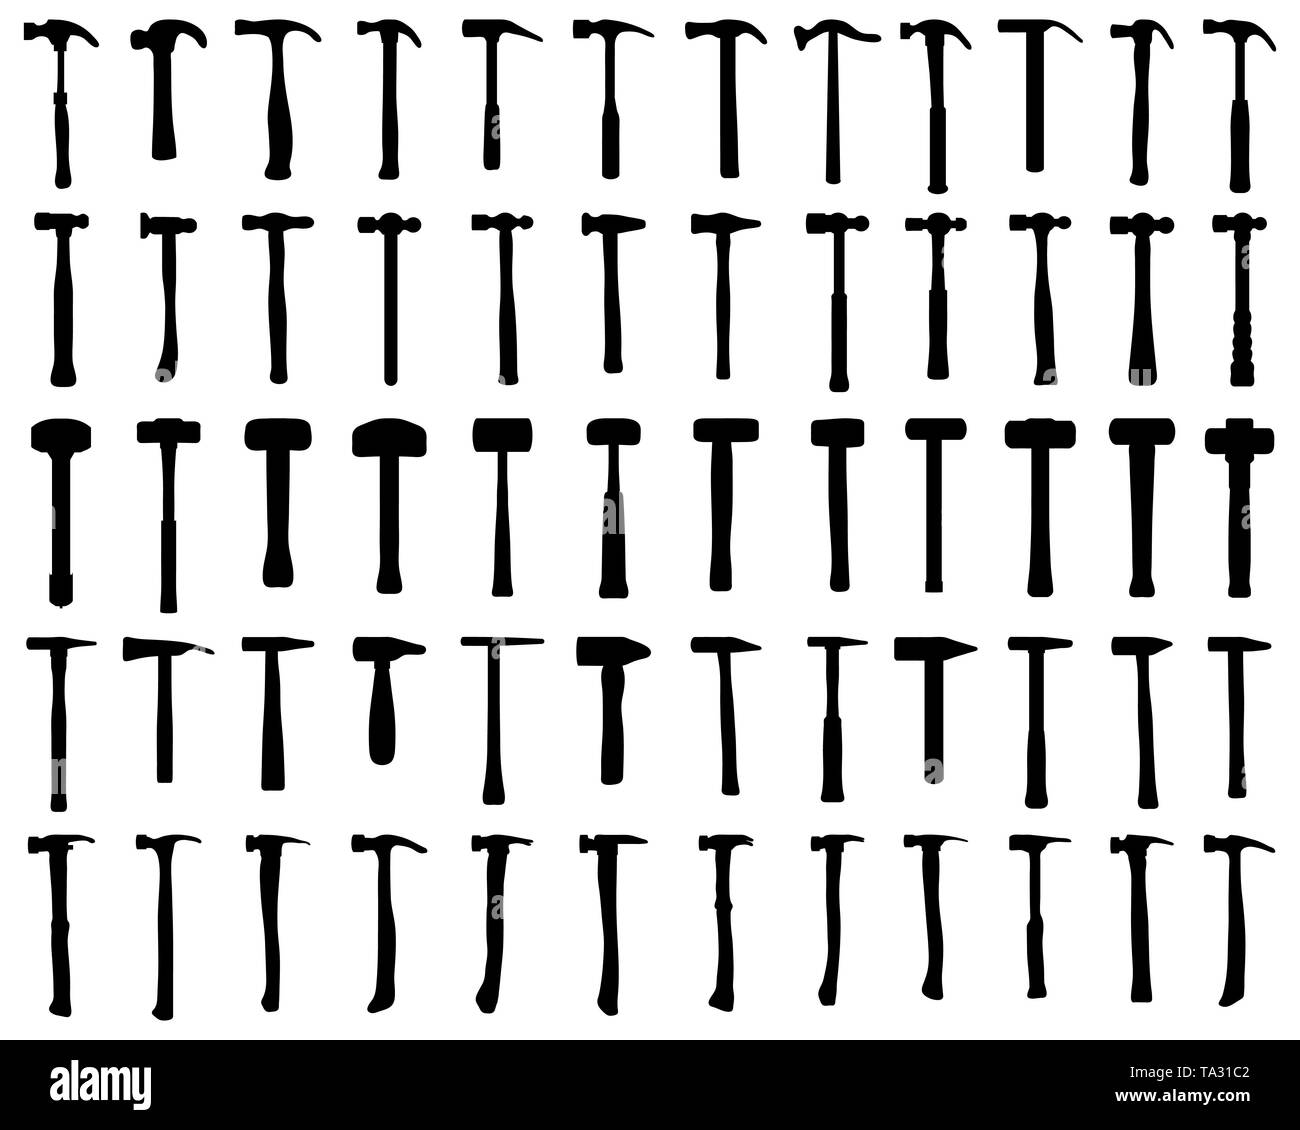 Black silhouettes of different hammer on a white background Stock Photo